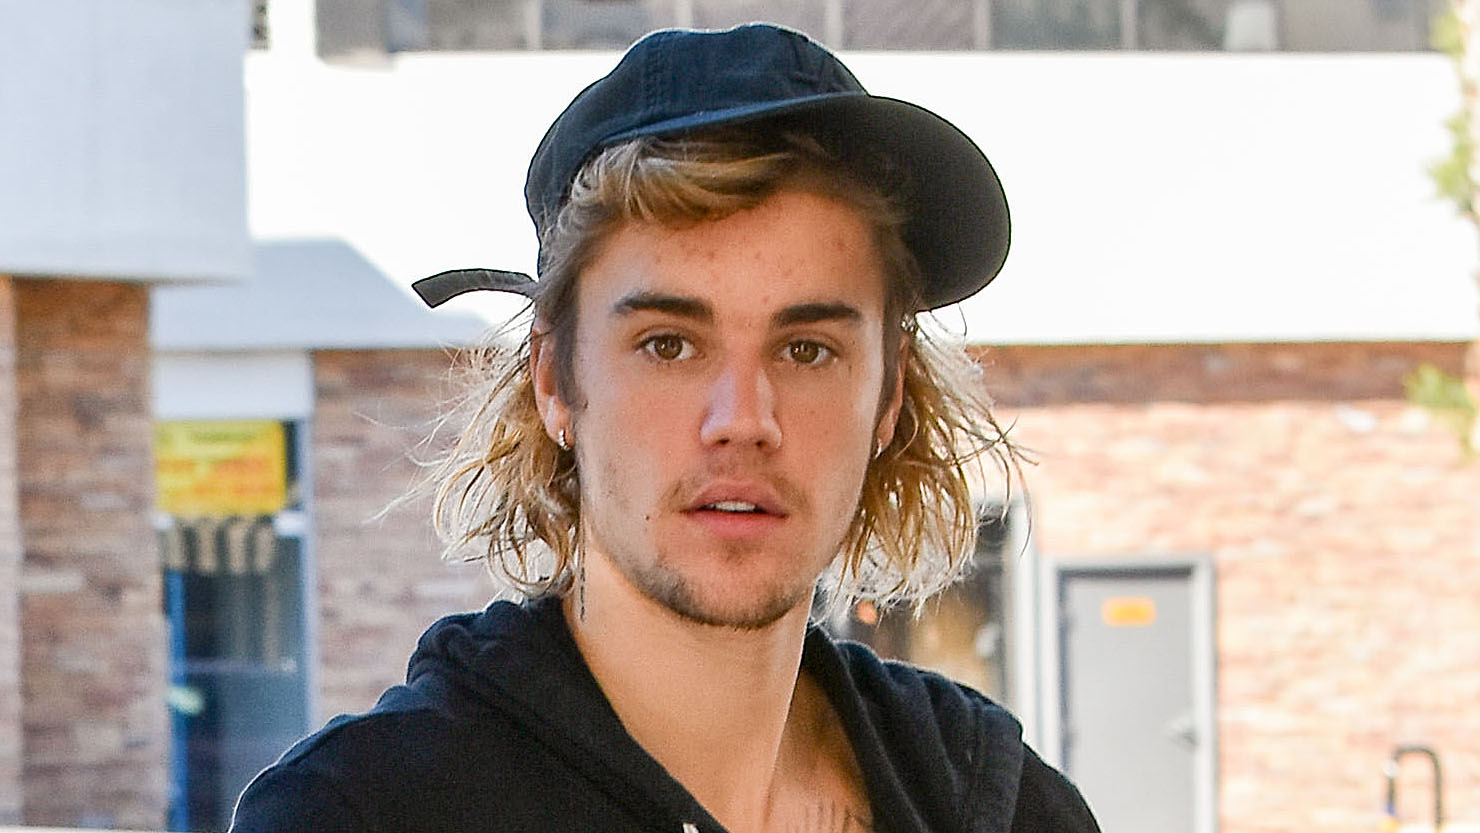 Justin Bieber Hits the Streets to Promote His Drew House Clothing Line, Justin  Bieber